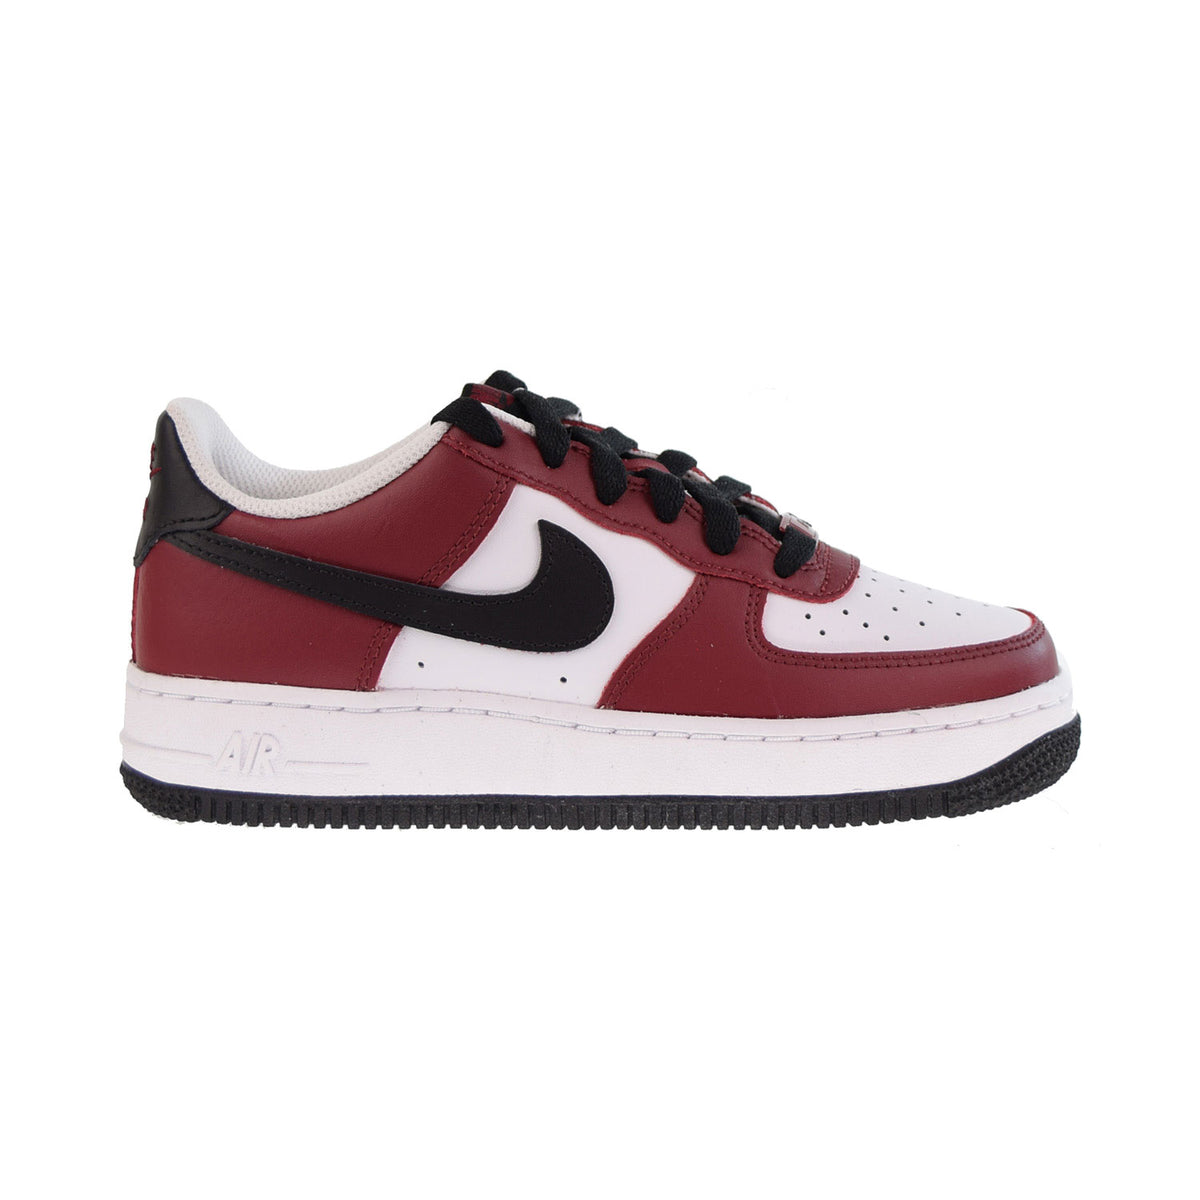 Nike Toddler Boys' Air Force 1 LV8 Basketball Shoes